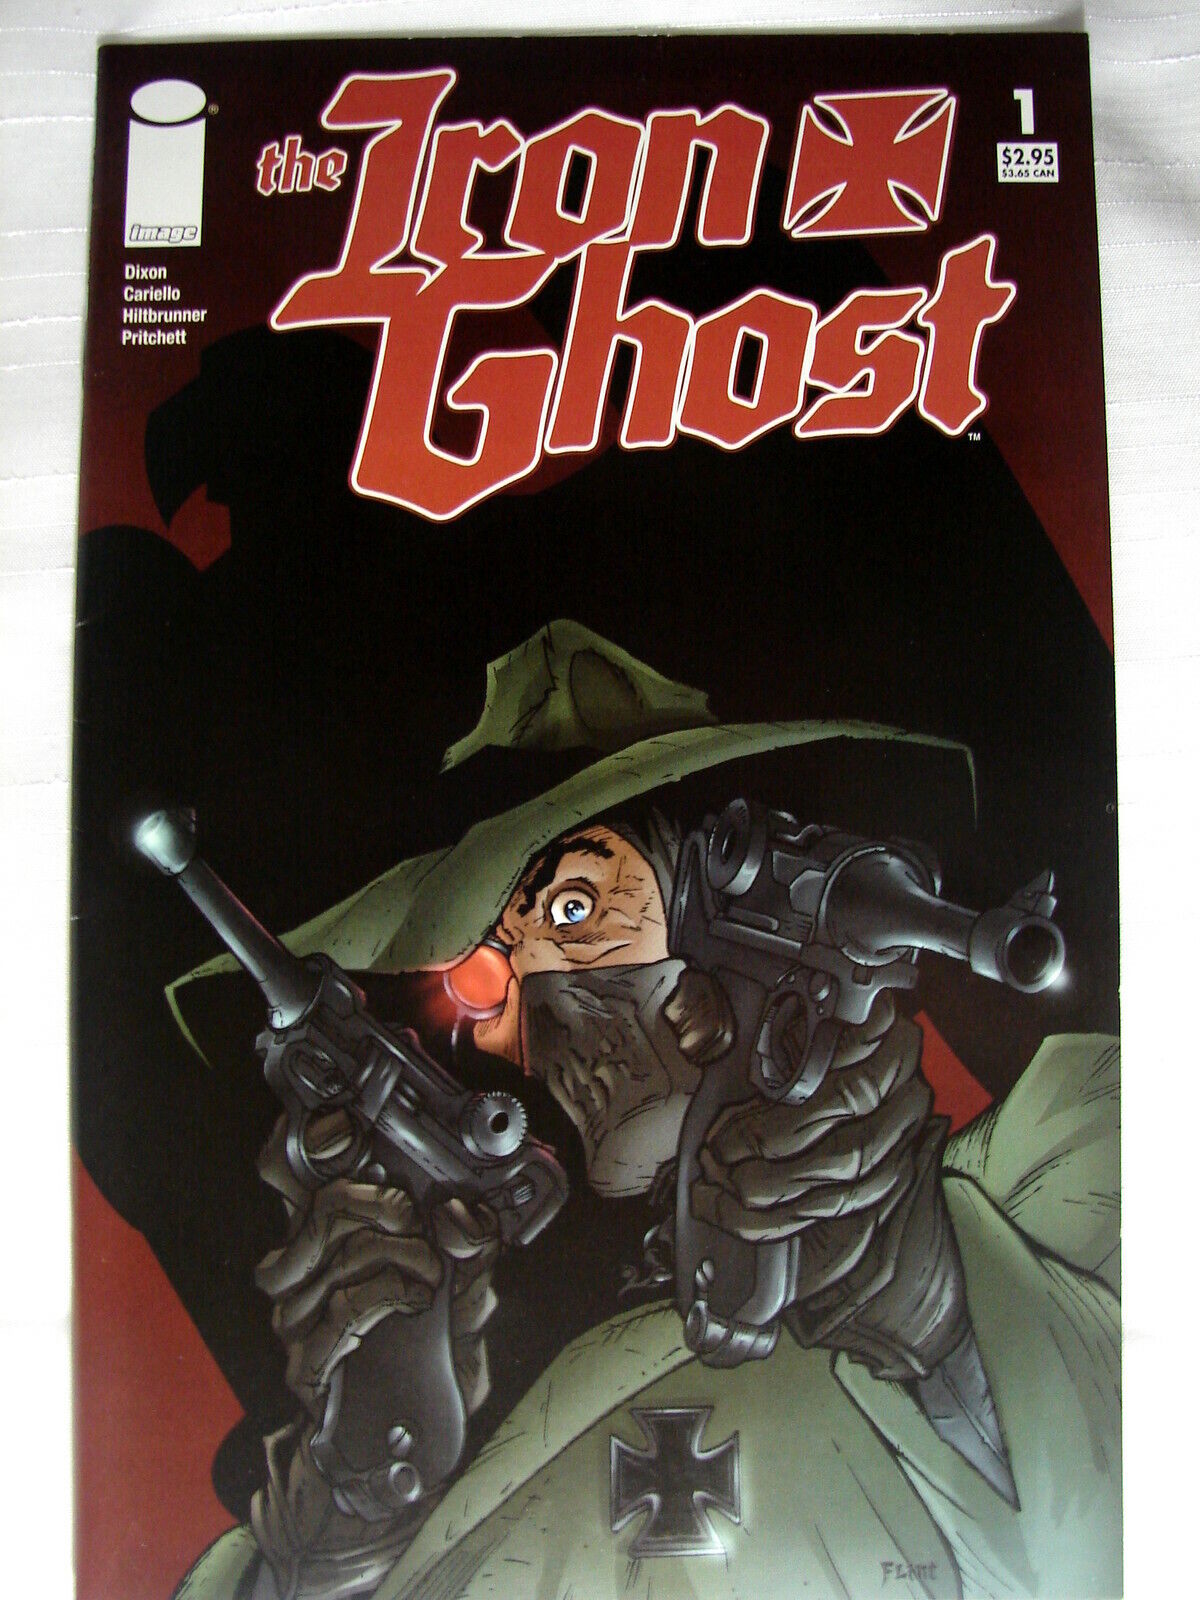 C 1933 Image Comics 2005 THE IRON GHOST #1 Mint Condition